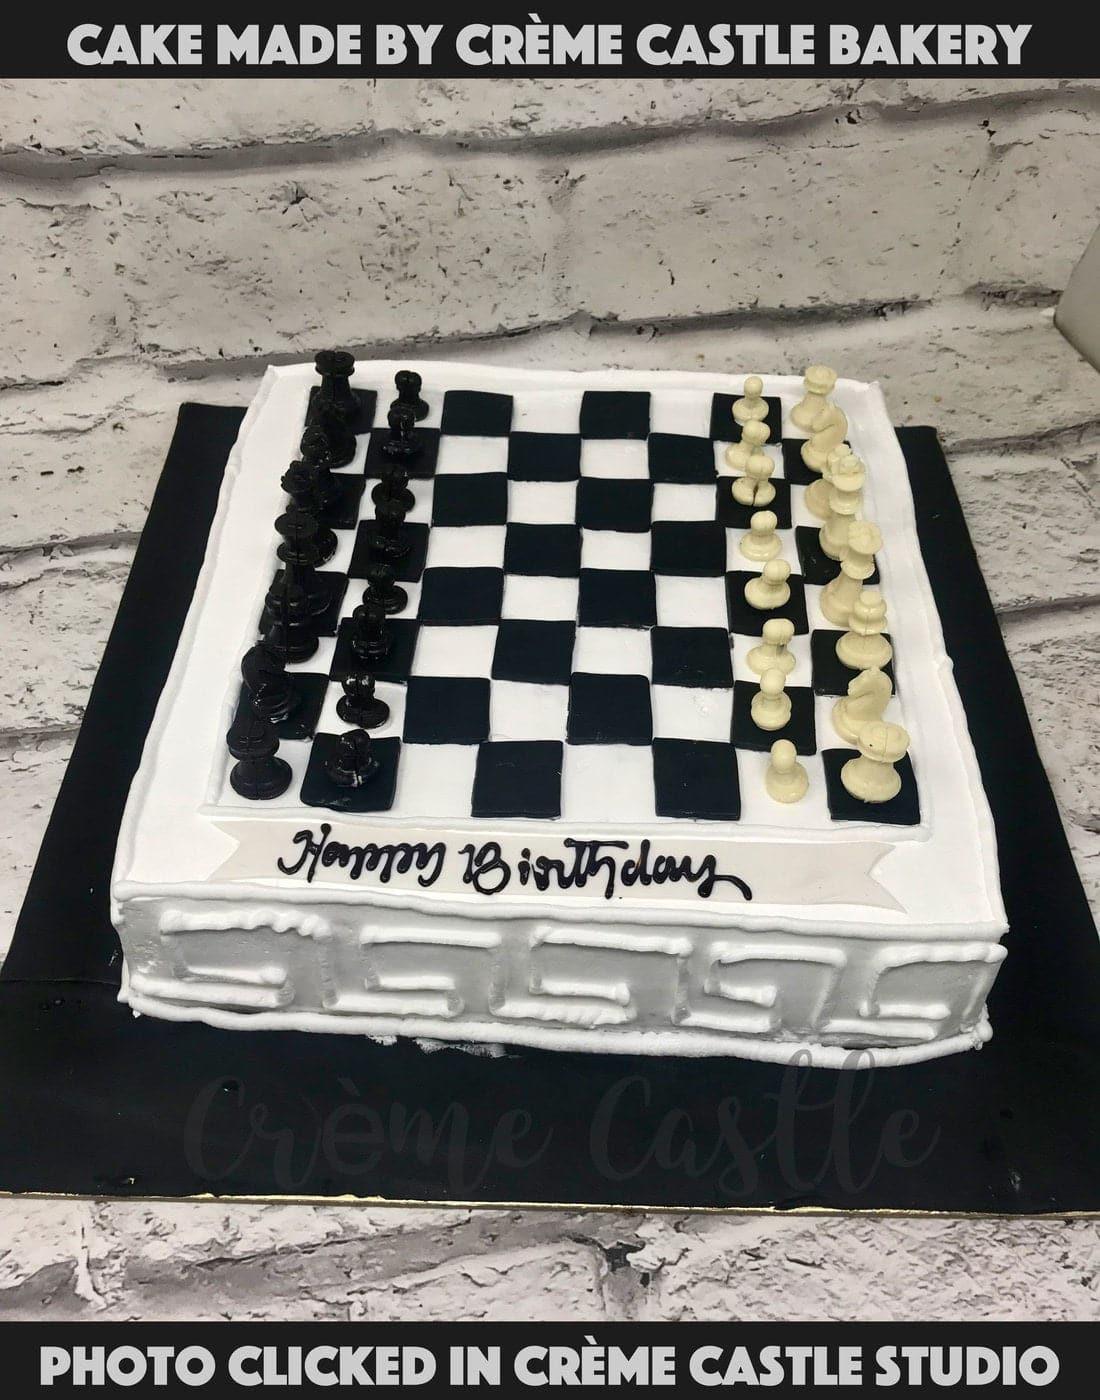 Aggregate 74+ chess theme cake best